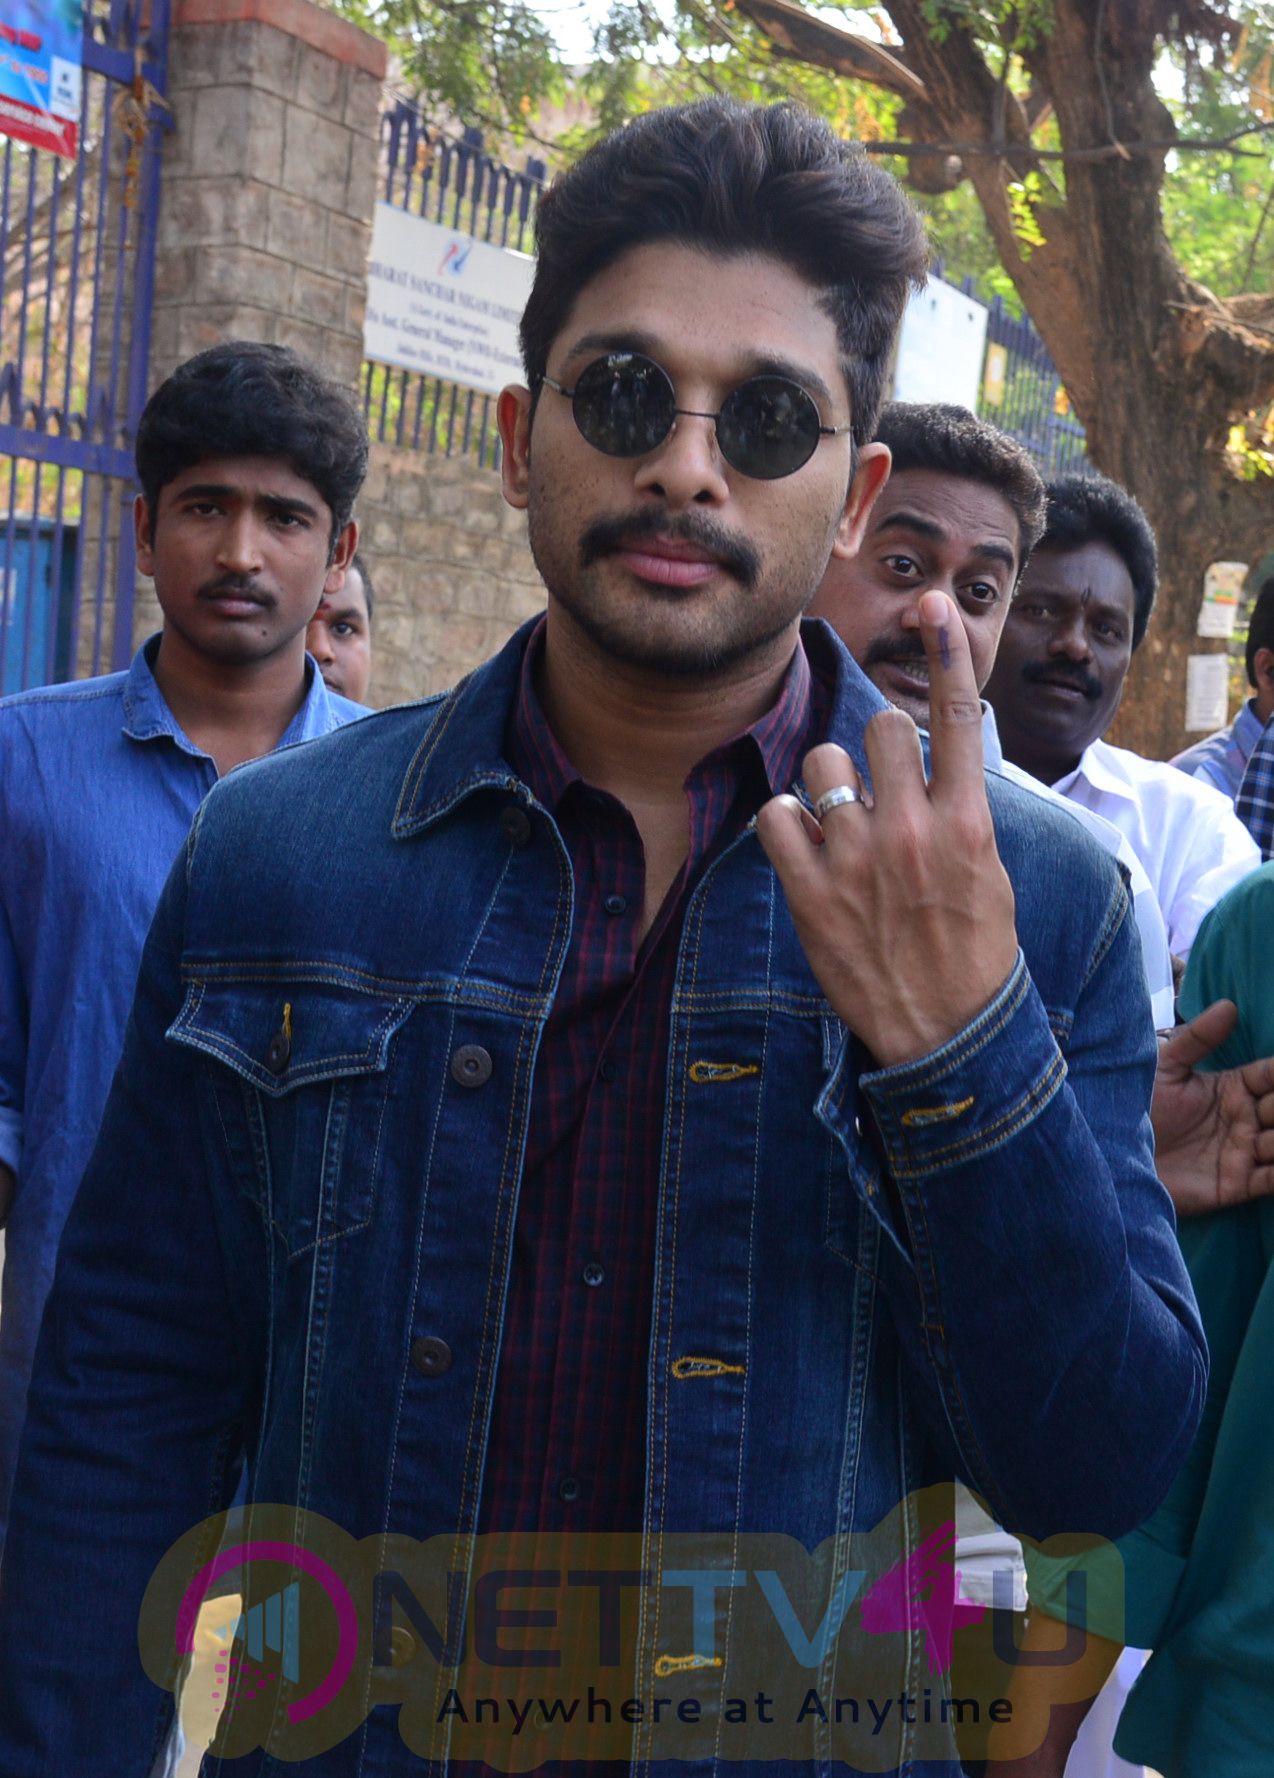 exclusive images of celebrities voting  40ghmc elections 146